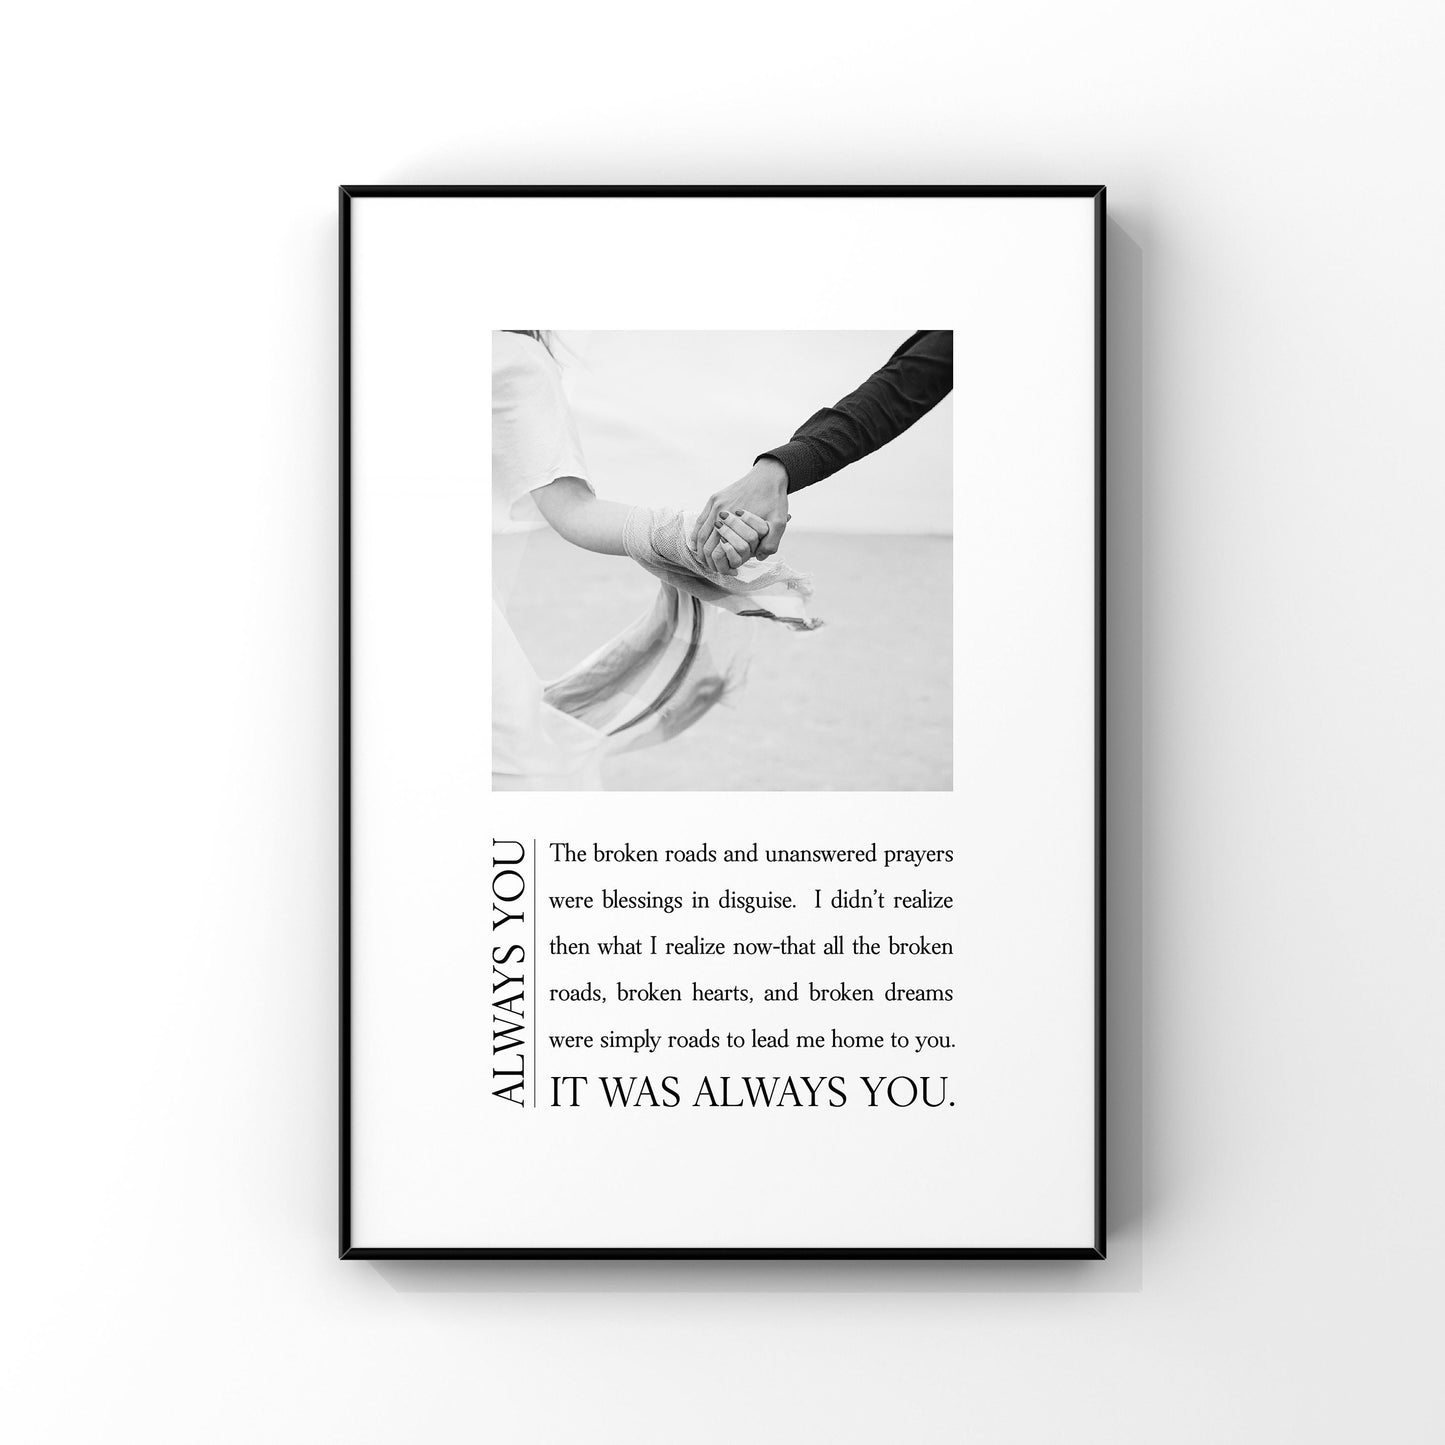 Custom always you,Personalized always you,Always you definition print,Anniversary photo gift,Gift for spouse,Customized photo gift